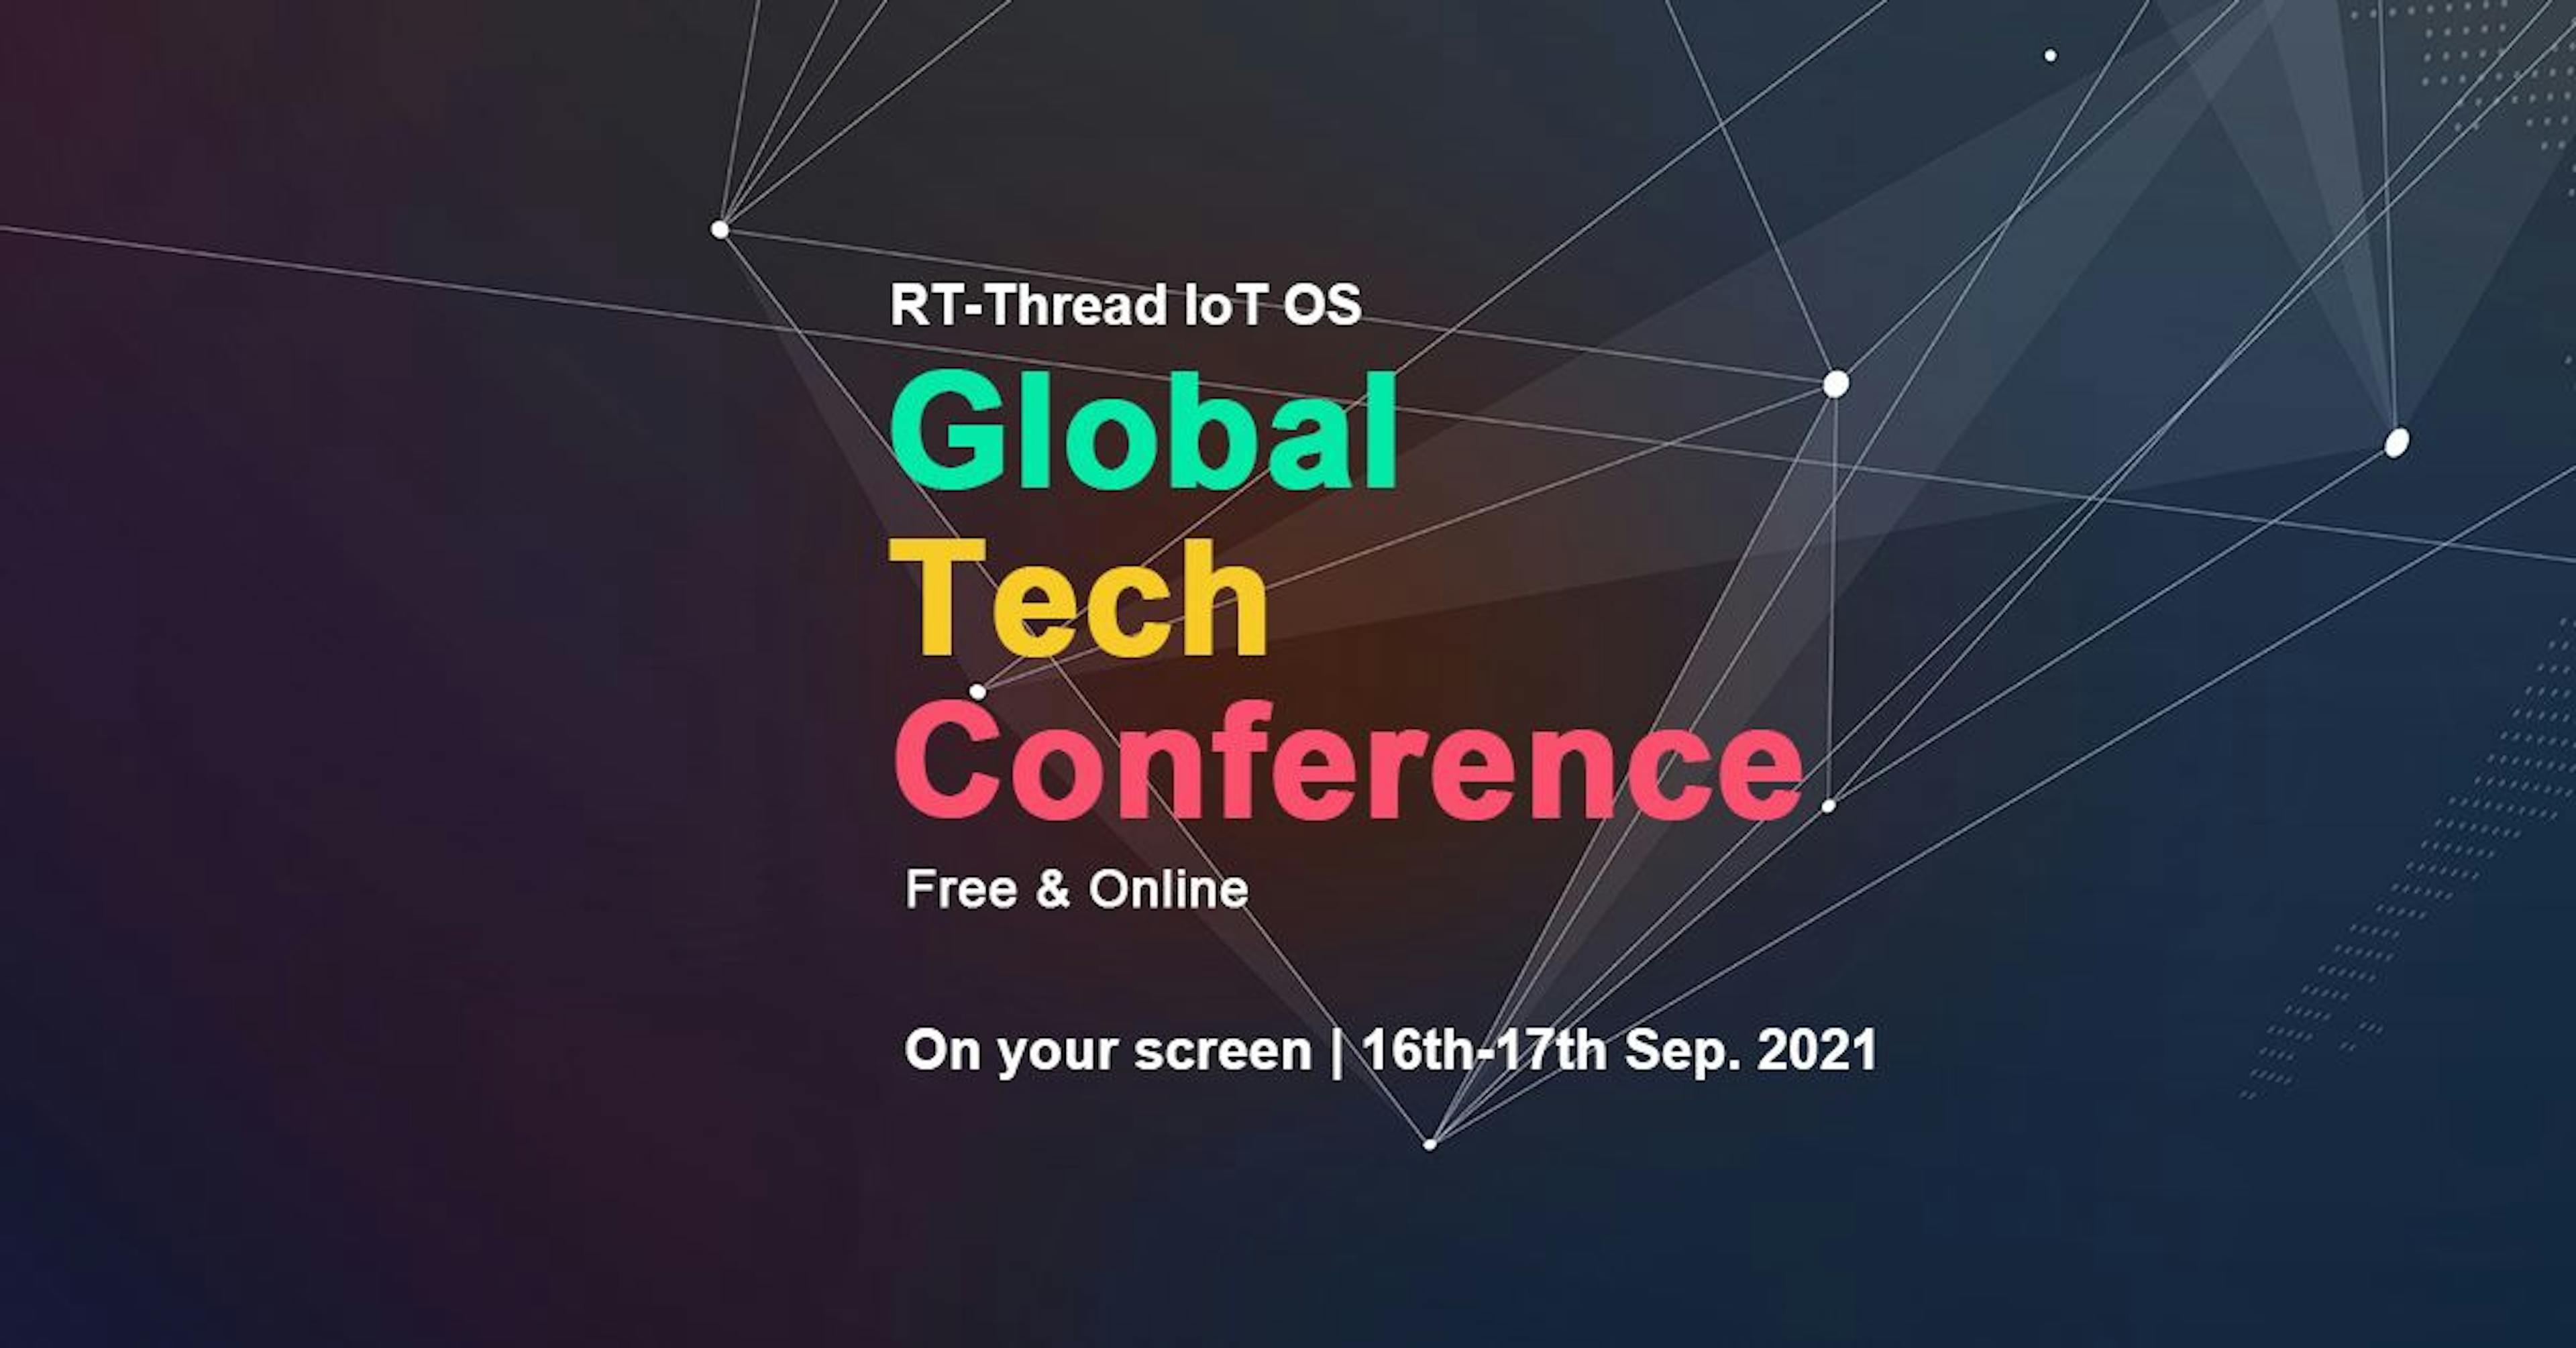 featured image - RT-Thread IoT OS Global Tech Conference is Open for Free Registration